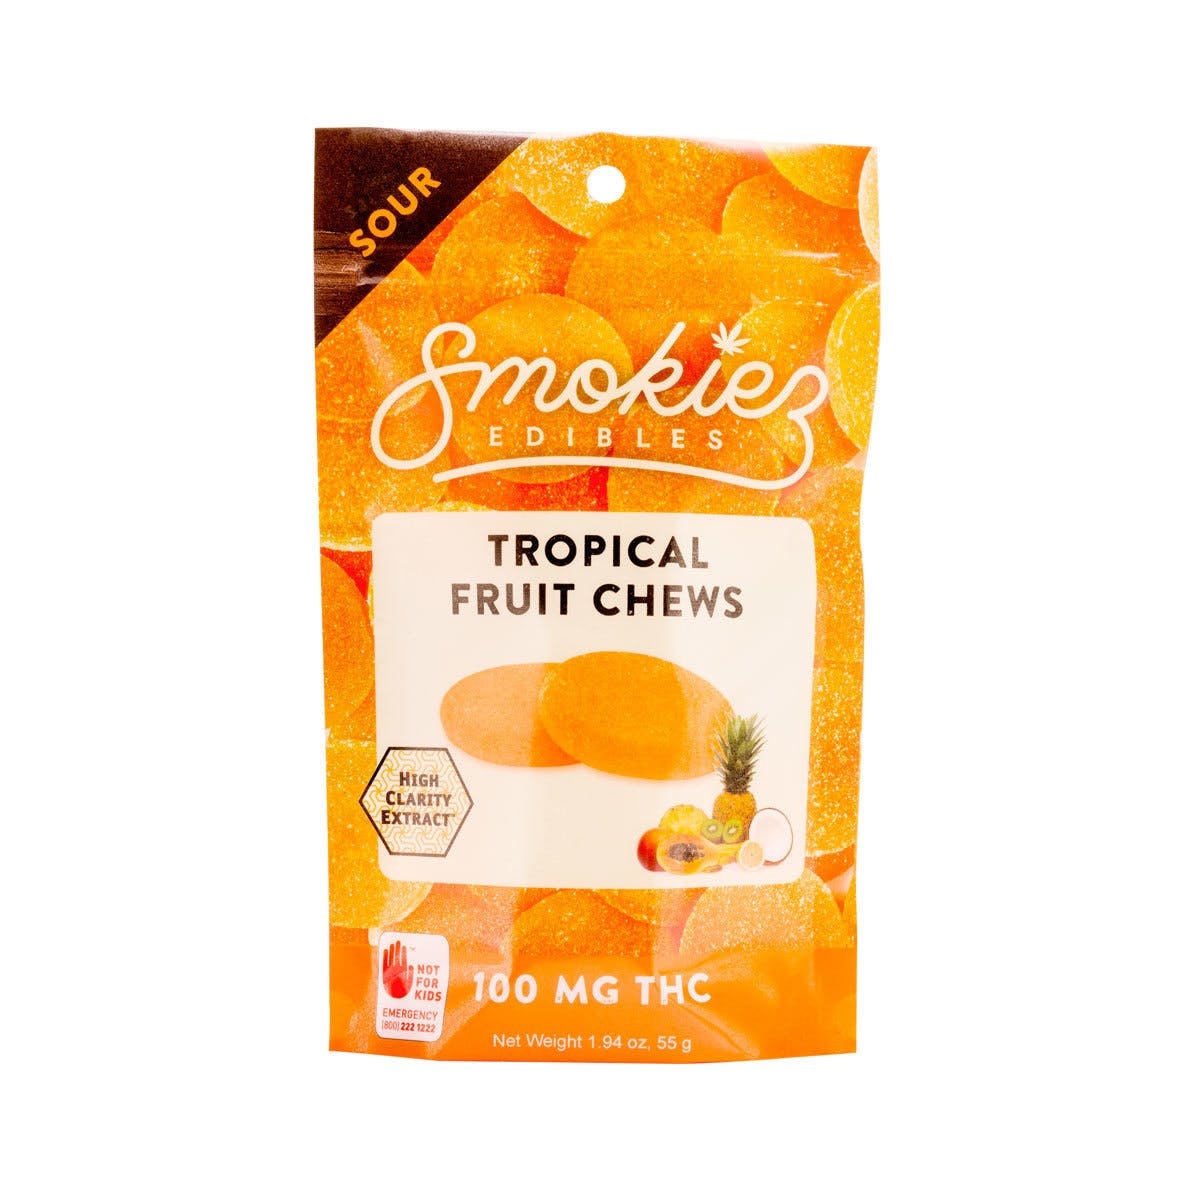 marijuana-dispensaries-compassion-union-in-north-hollywood-sour-tropical-fruit-chews-2c-100-mg